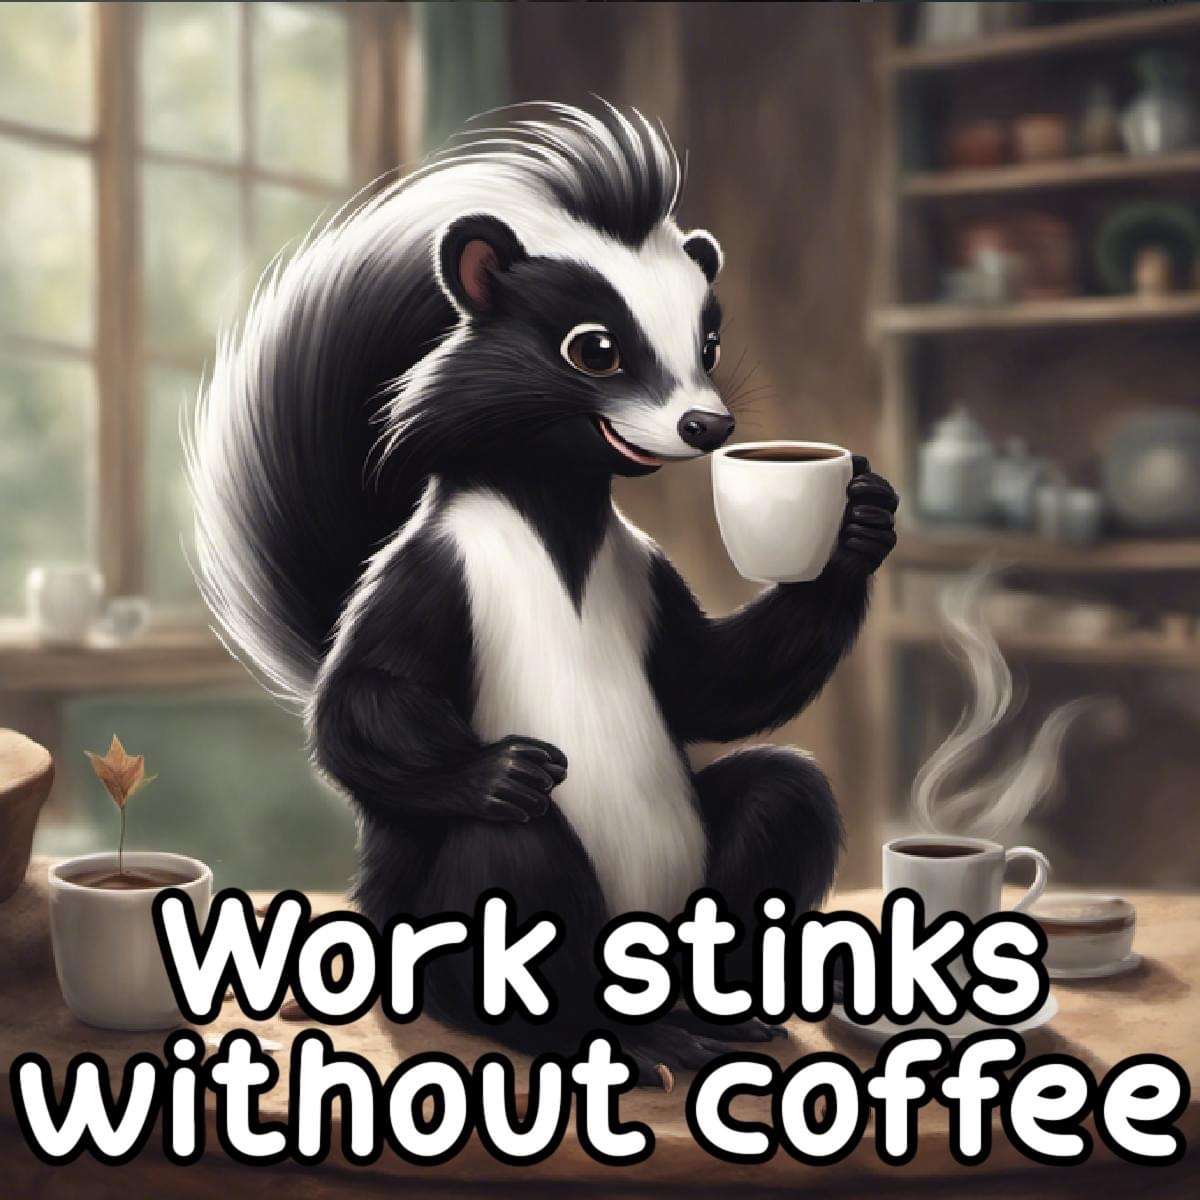 skunk and coffee puzzle online from photo